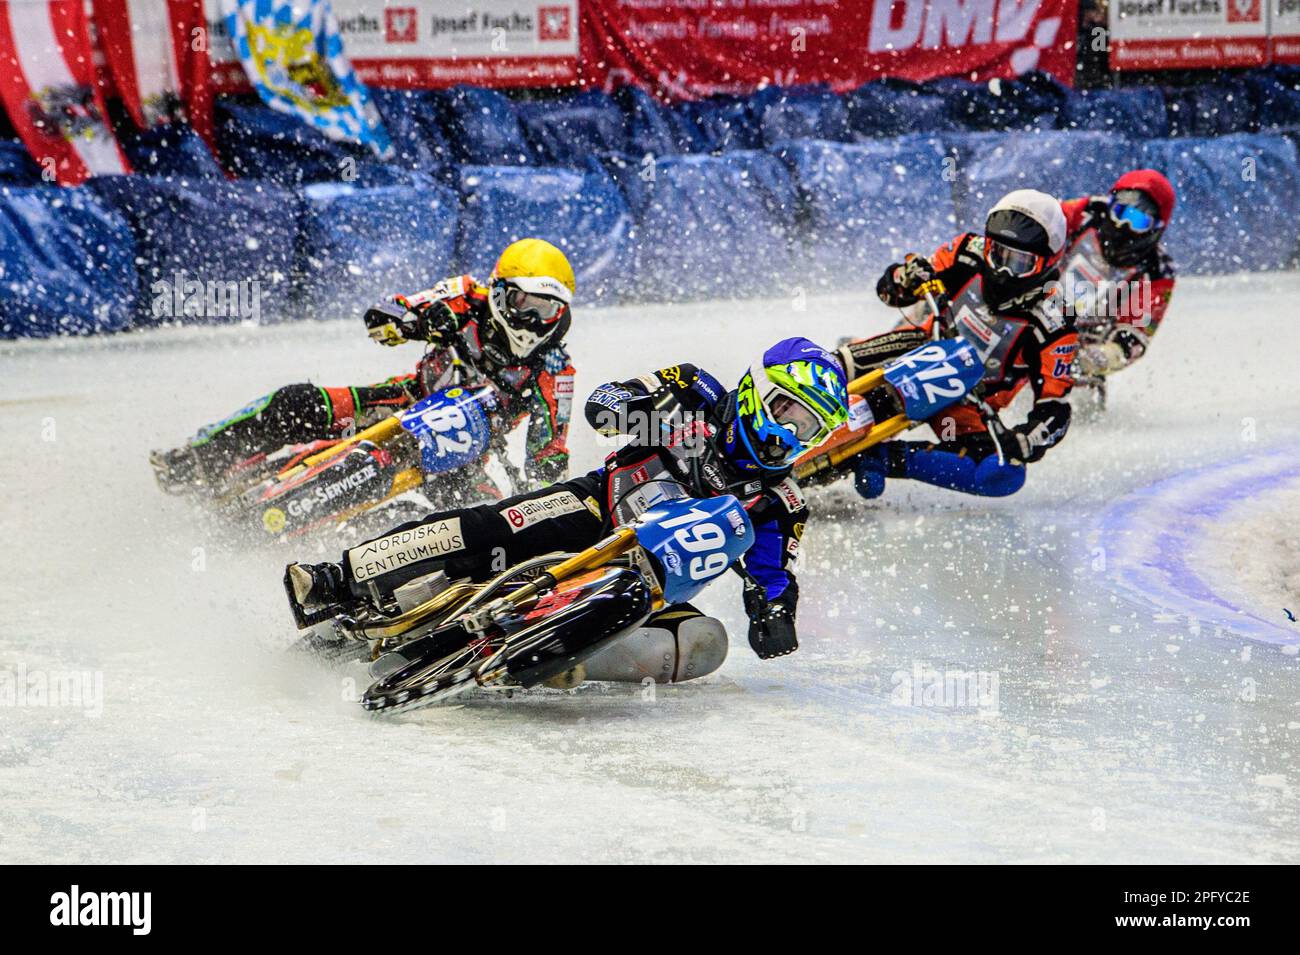 Inzell, Germany on Sunday 19th March 2023. Martin Haarahiltunen (199) (Blue) leads Markus Jell (82) (Yellow) Lukas Hutla (212) (White) and Jo Saetre (357) (Red) during the Ice Speedway Gladiators World Championship Final 2 at Max-Aicher-Arena, Inzell, Germany on Sunday 19th March 2023. (Photo: Ian Charles | MI News) Credit: MI News & Sport /Alamy Live News Stock Photo